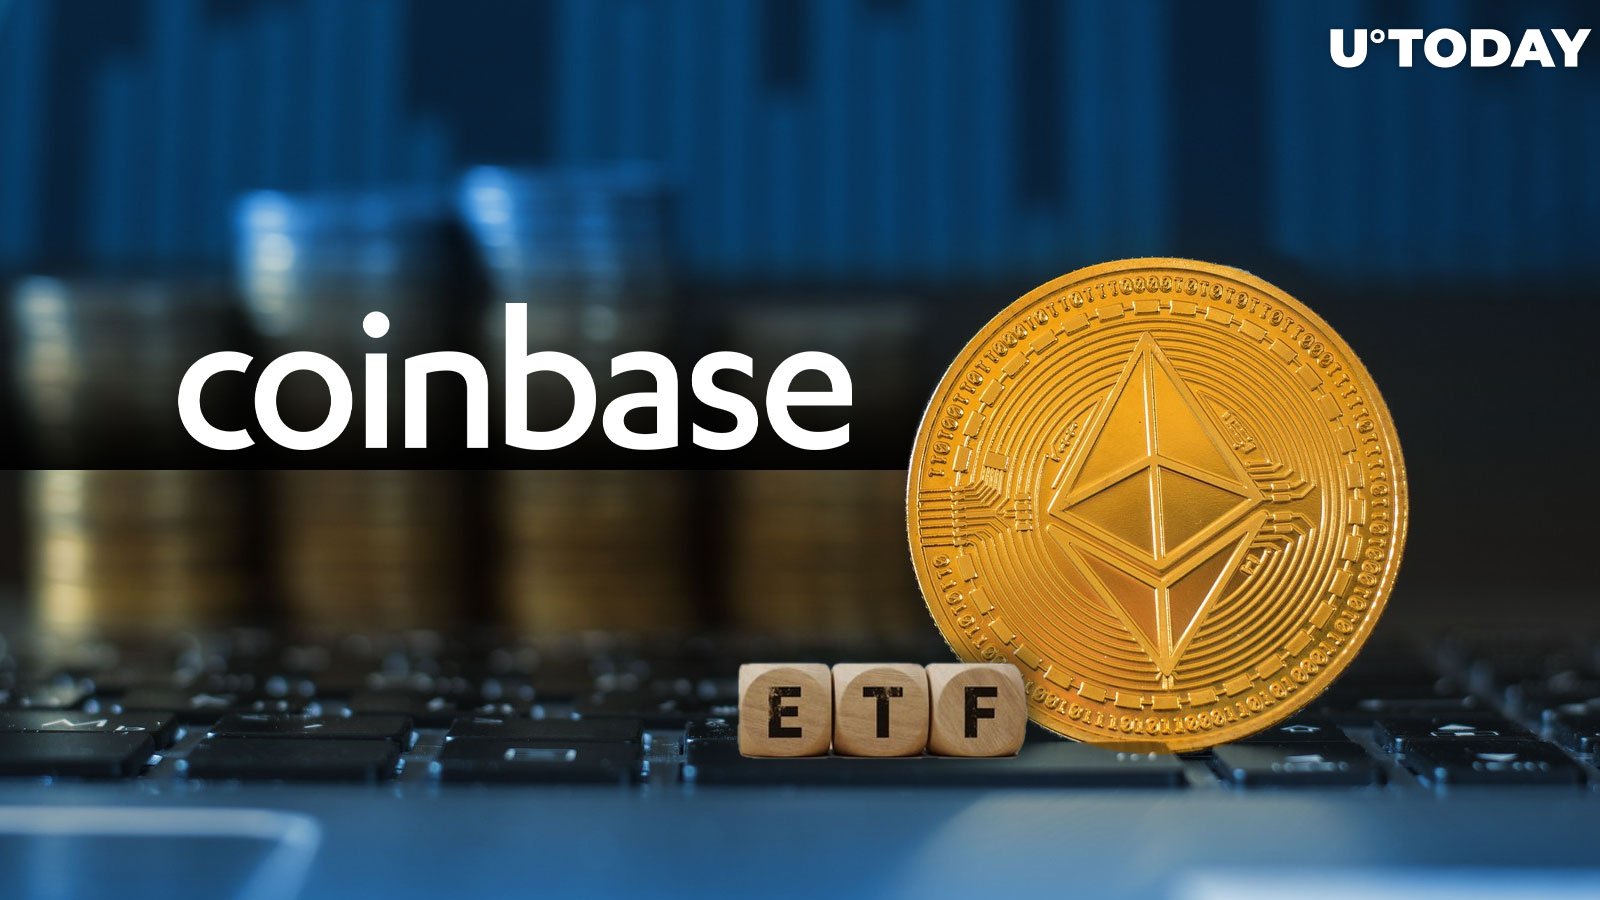 Spot Ethereum ETF Promoted by Coinbase: Details